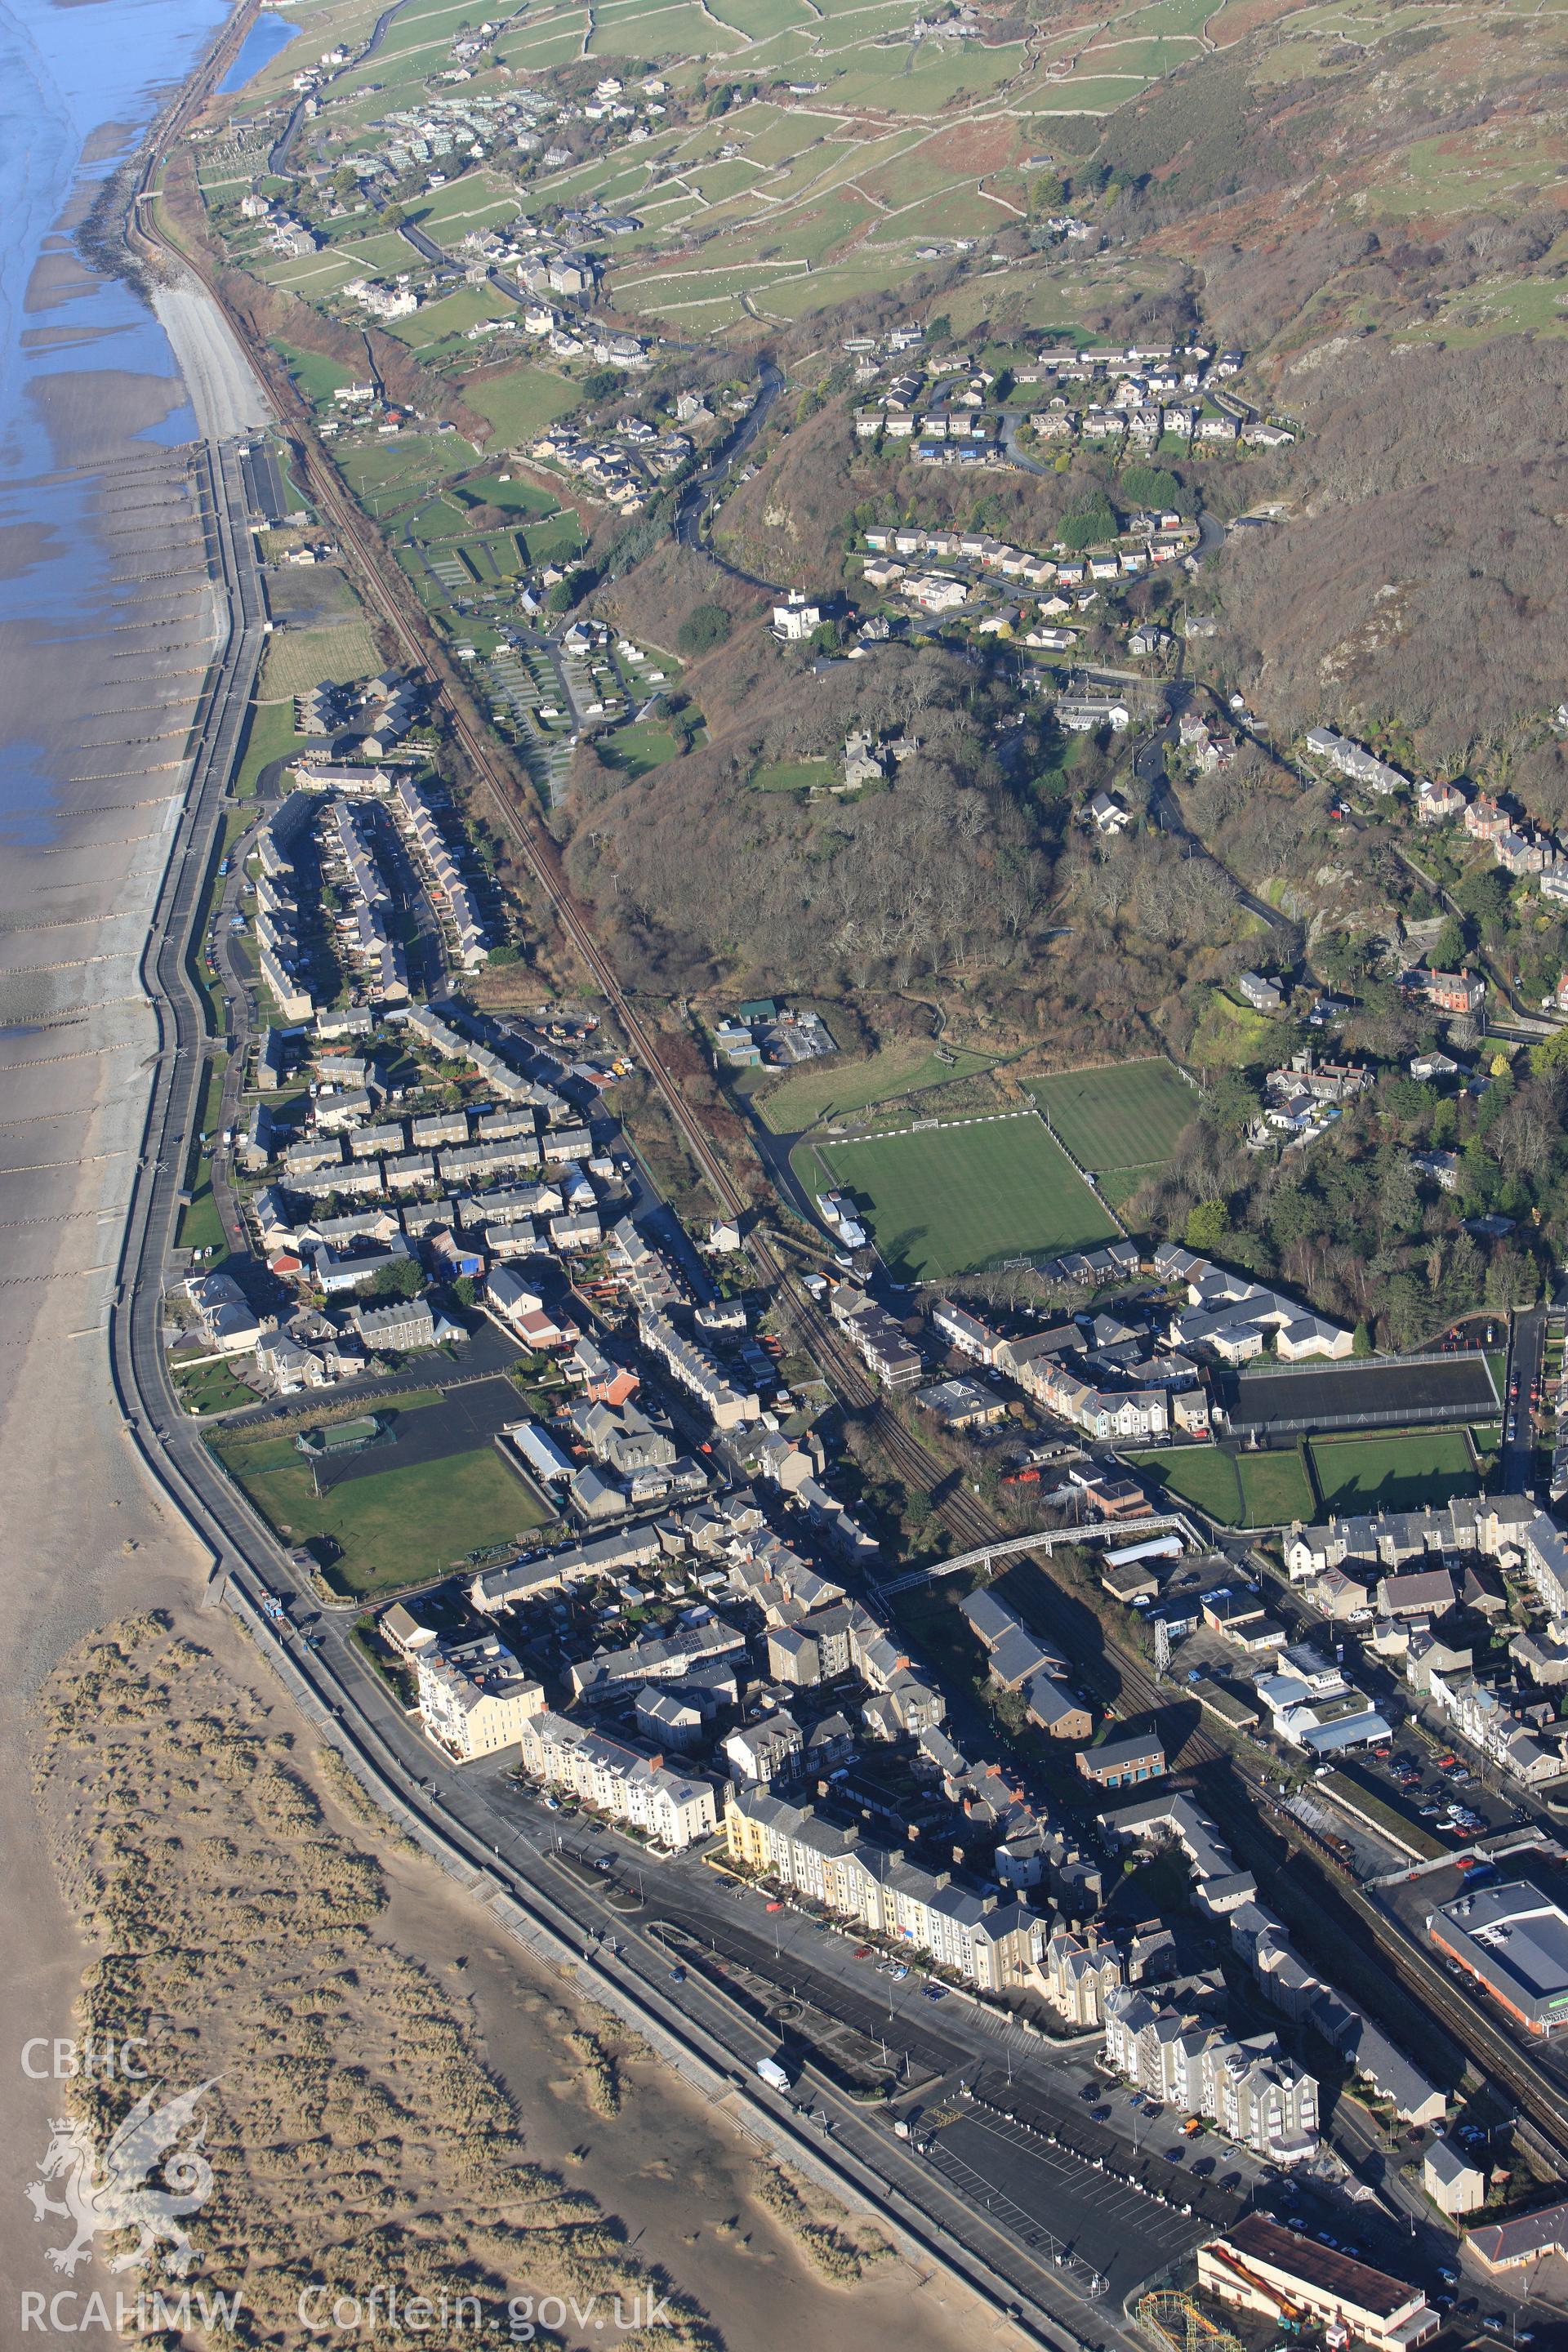 RCAHMW colour oblique photograph of Barmouth, townscape looking north. Taken by Toby Driver on 10/12/2012.